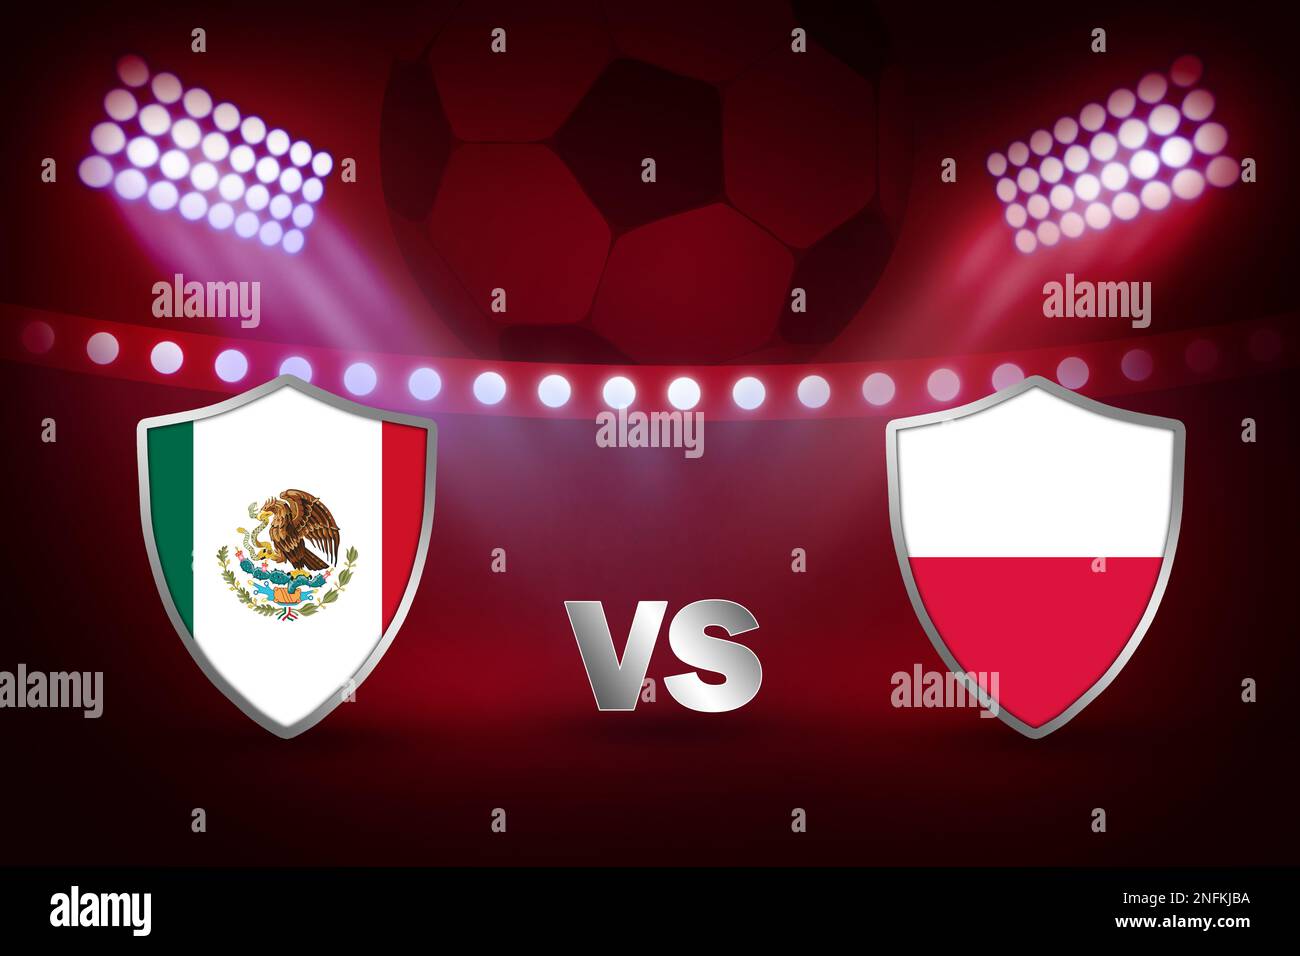 Mexico Vs Poland Football match fixture with stadium lights in purple and ball on the back. Football match backdrop illustration. Stock Photo